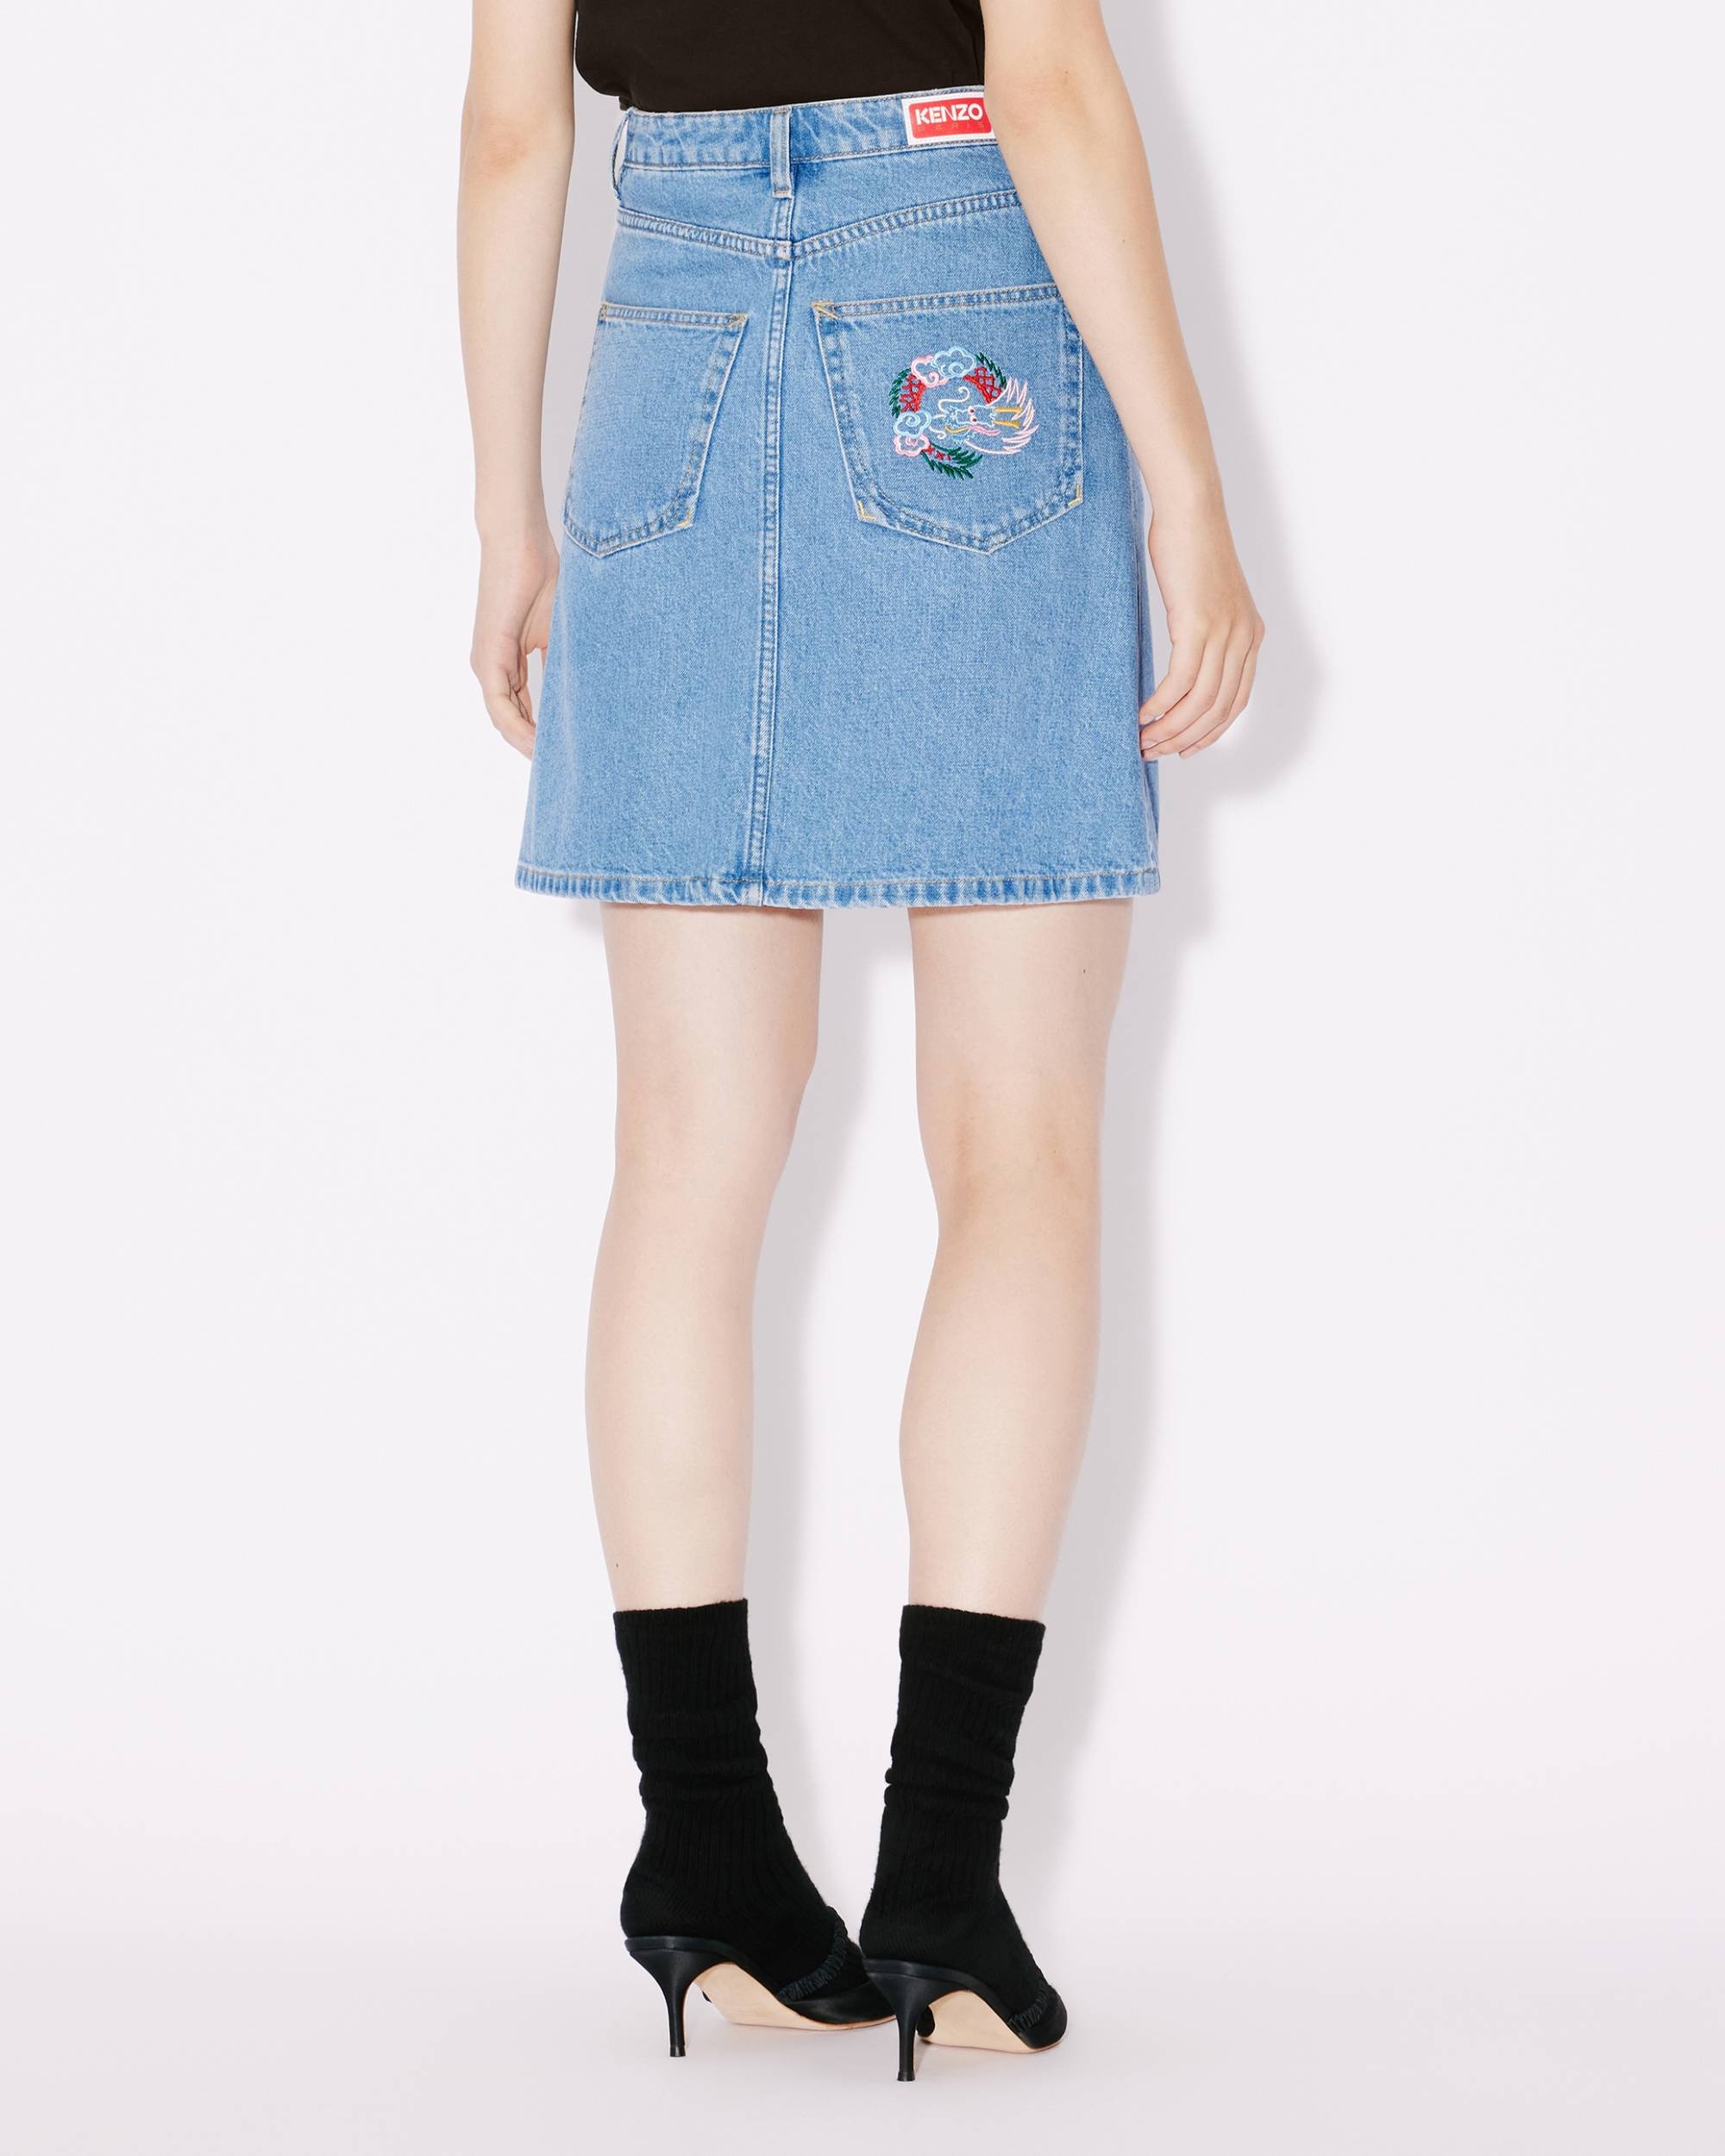 'Year of the Dragon' embroidered Japanese denim miniskirt - 5